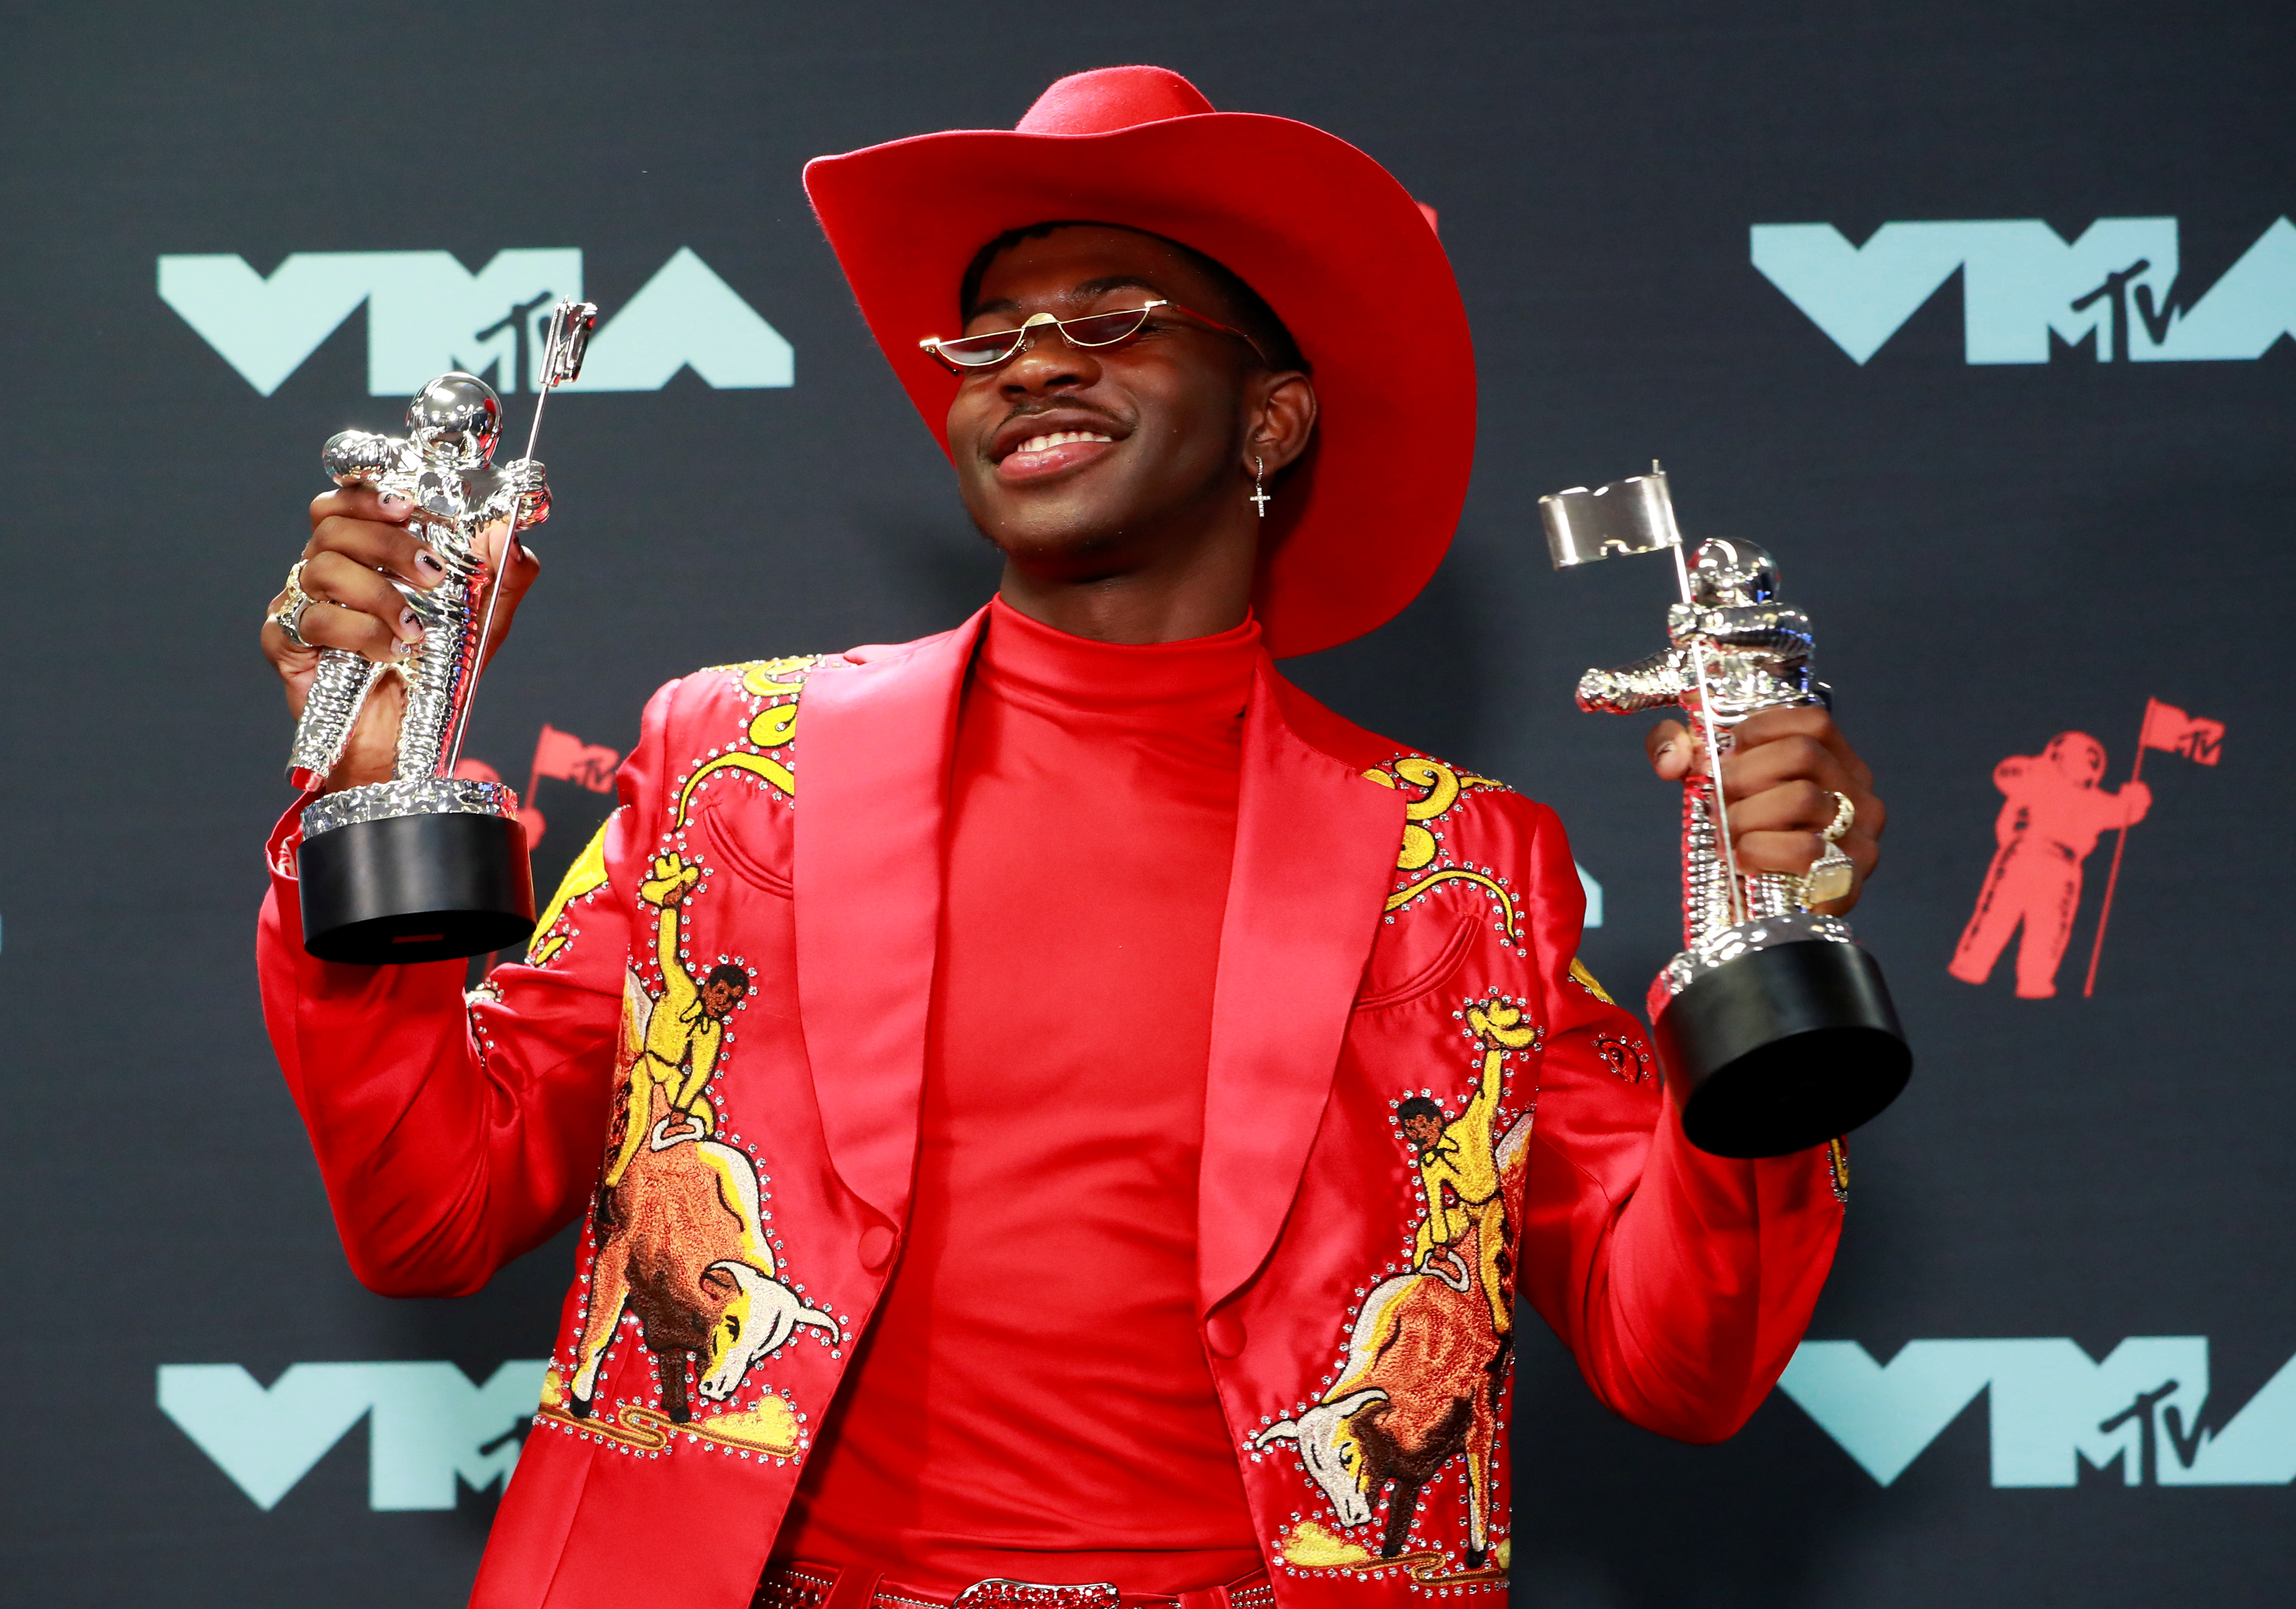 Satan Shoes: Nike suing art collective that made sneaker collaboration with  Lil Nas X